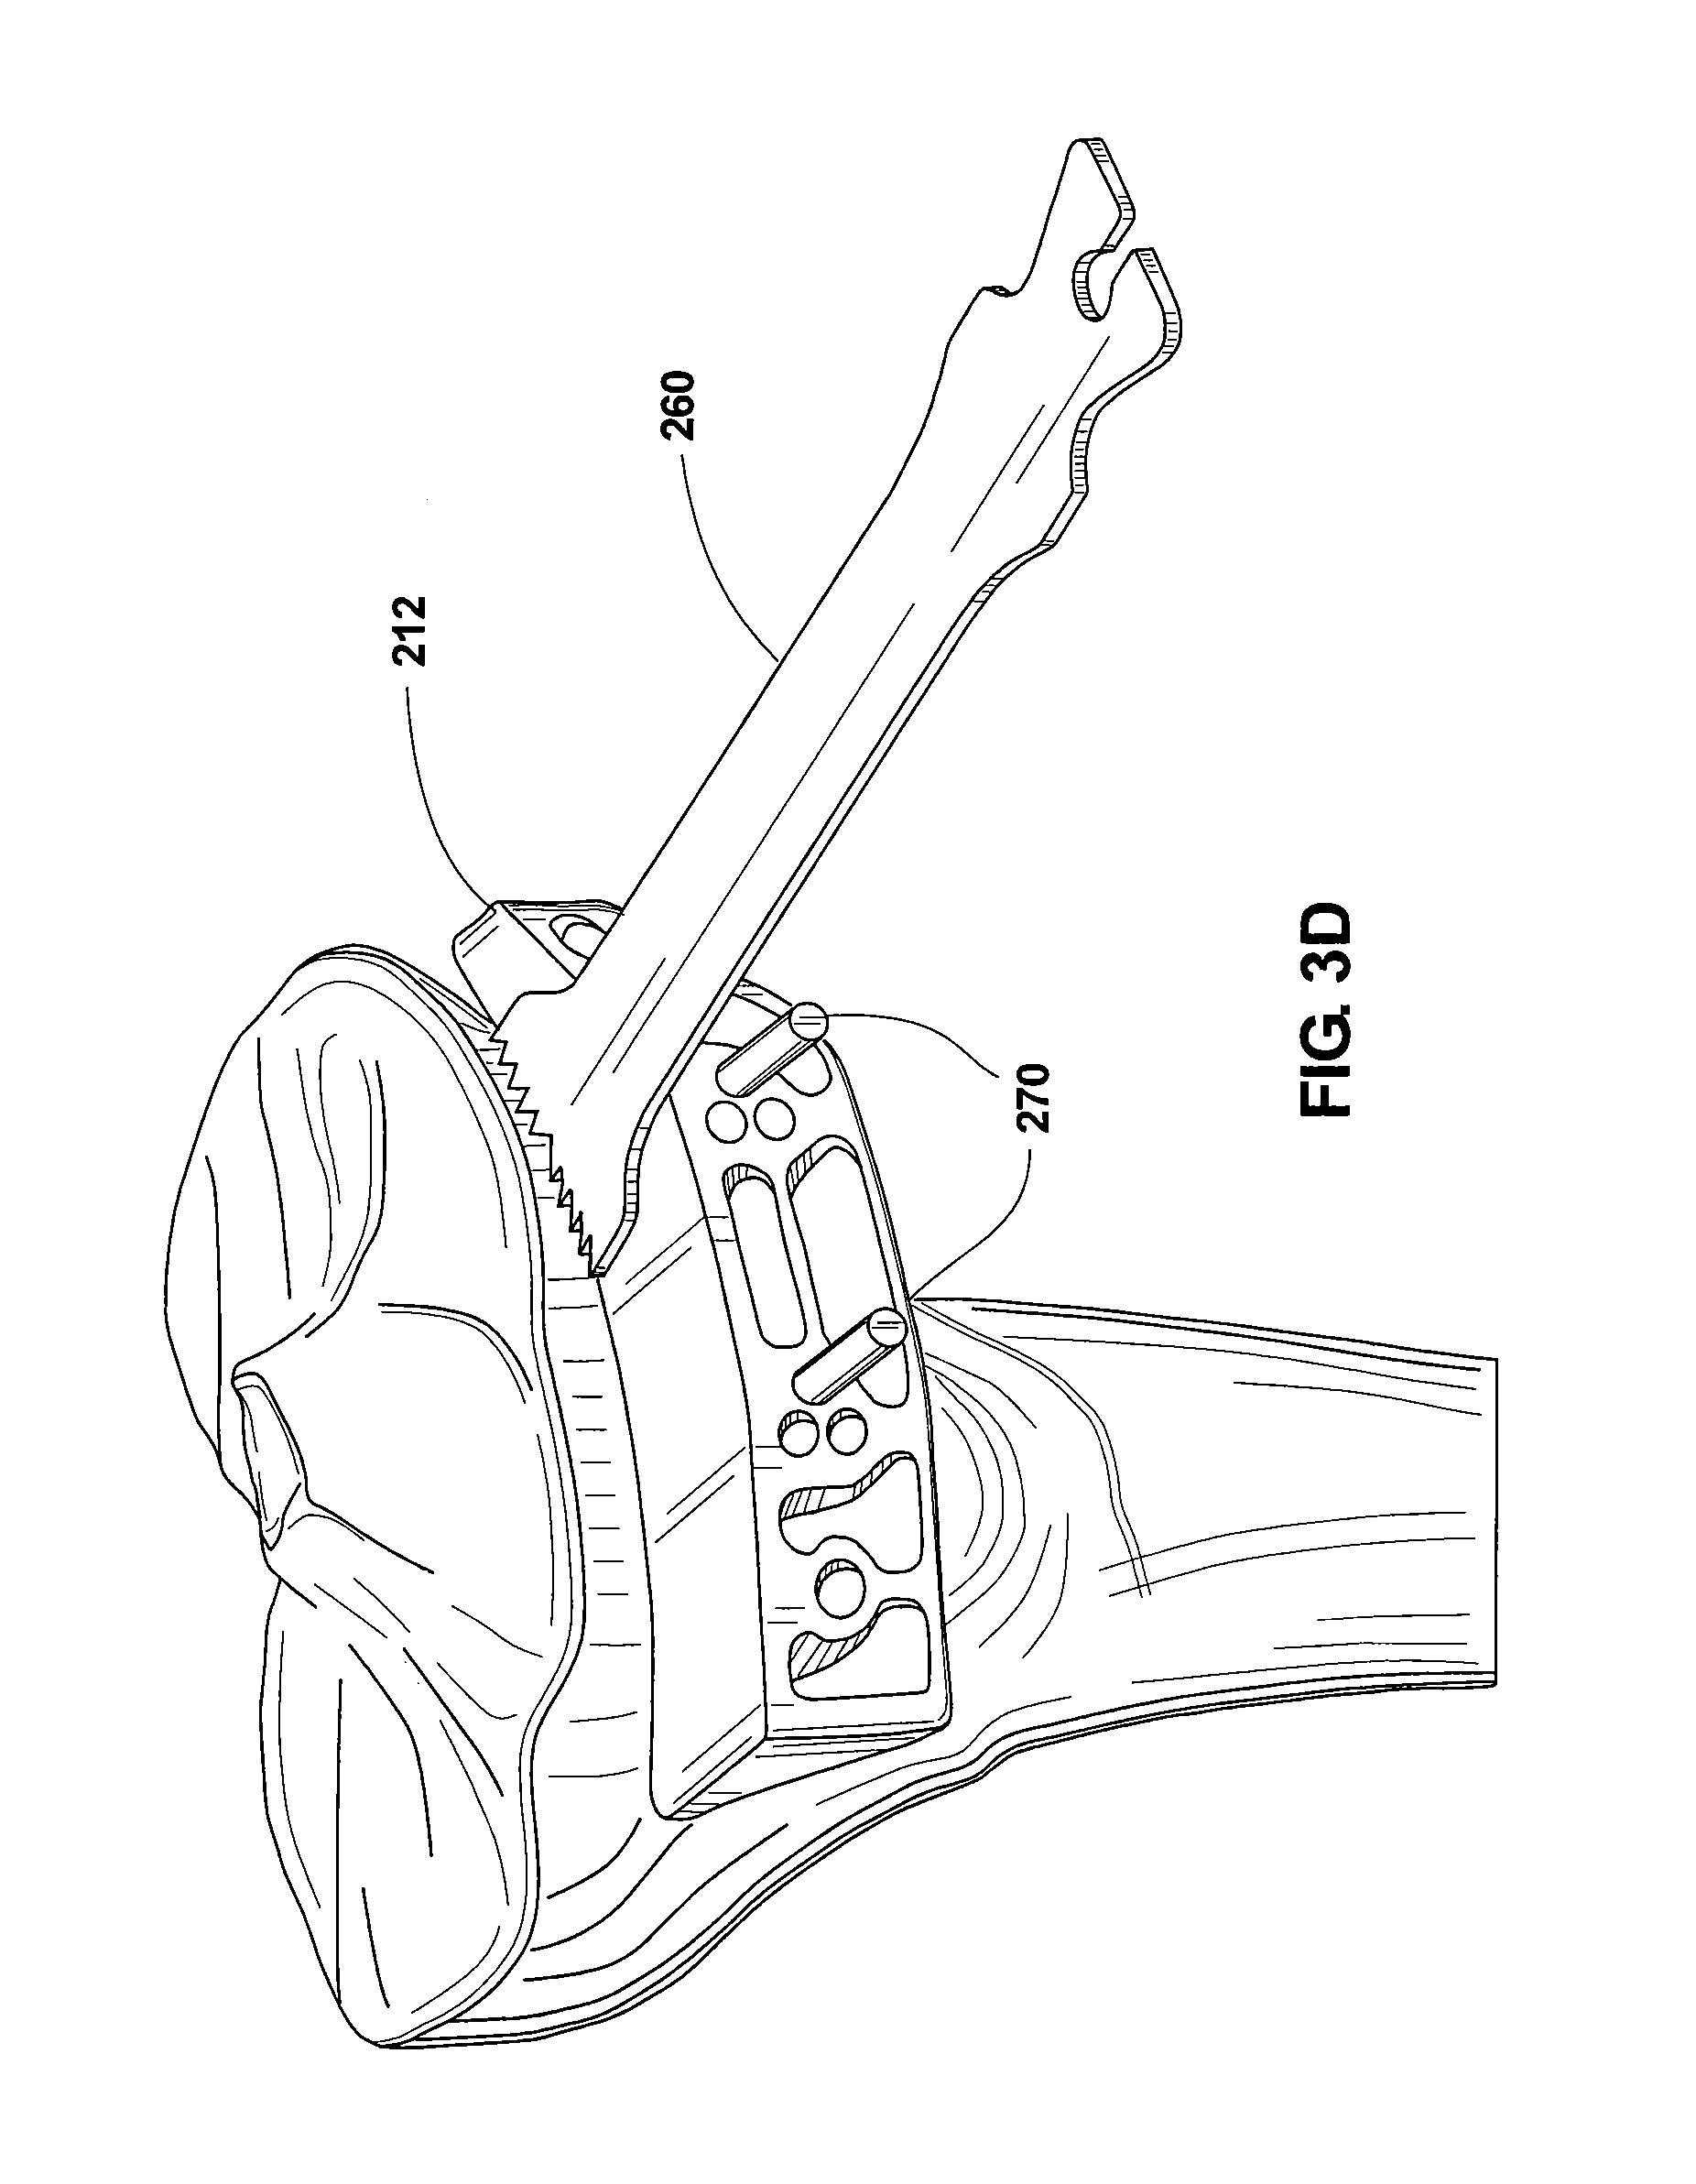 Bone positioning device and method